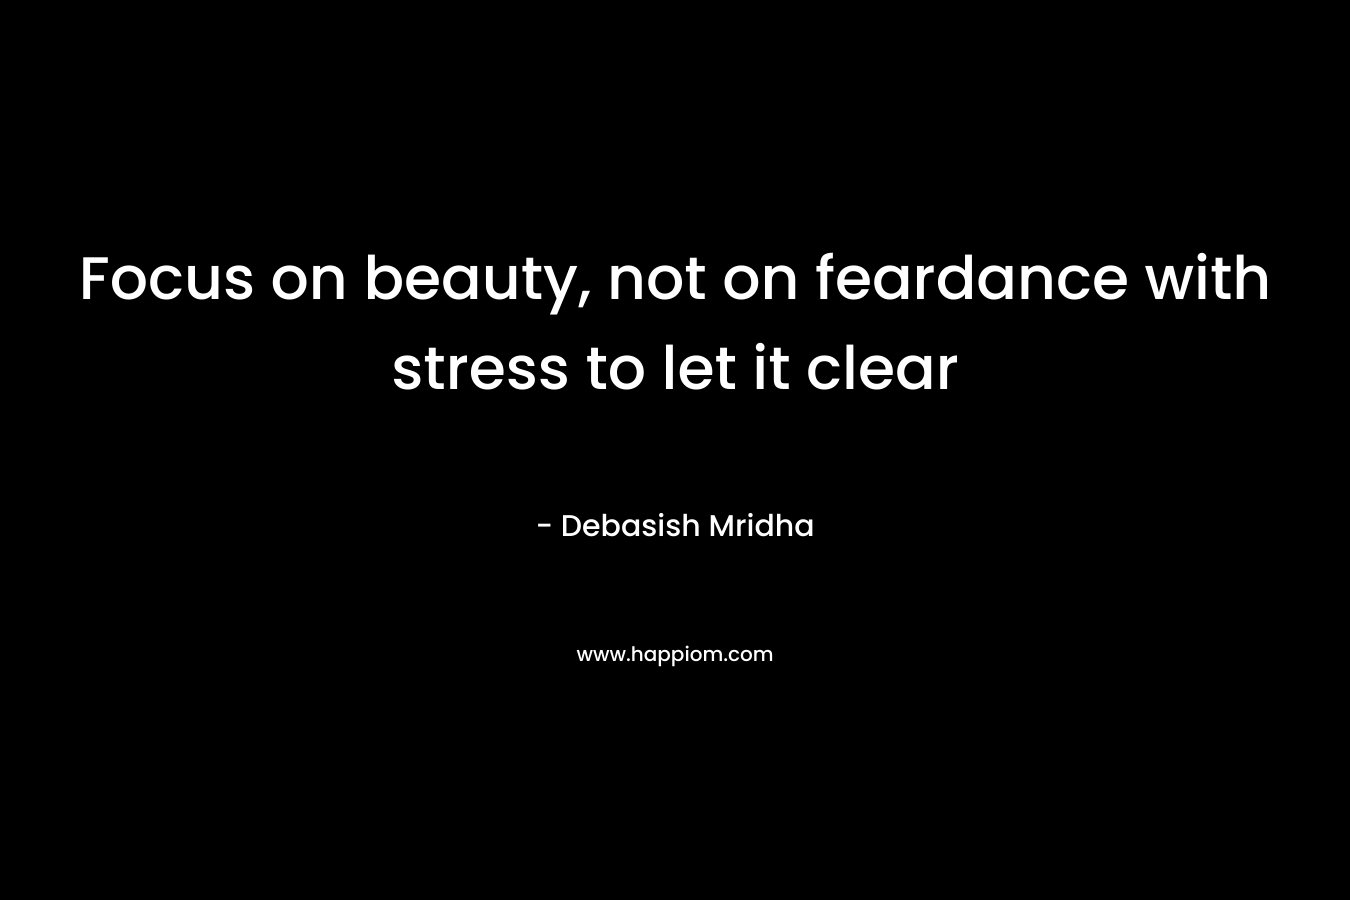 Focus on beauty, not on feardance with stress to let it clear